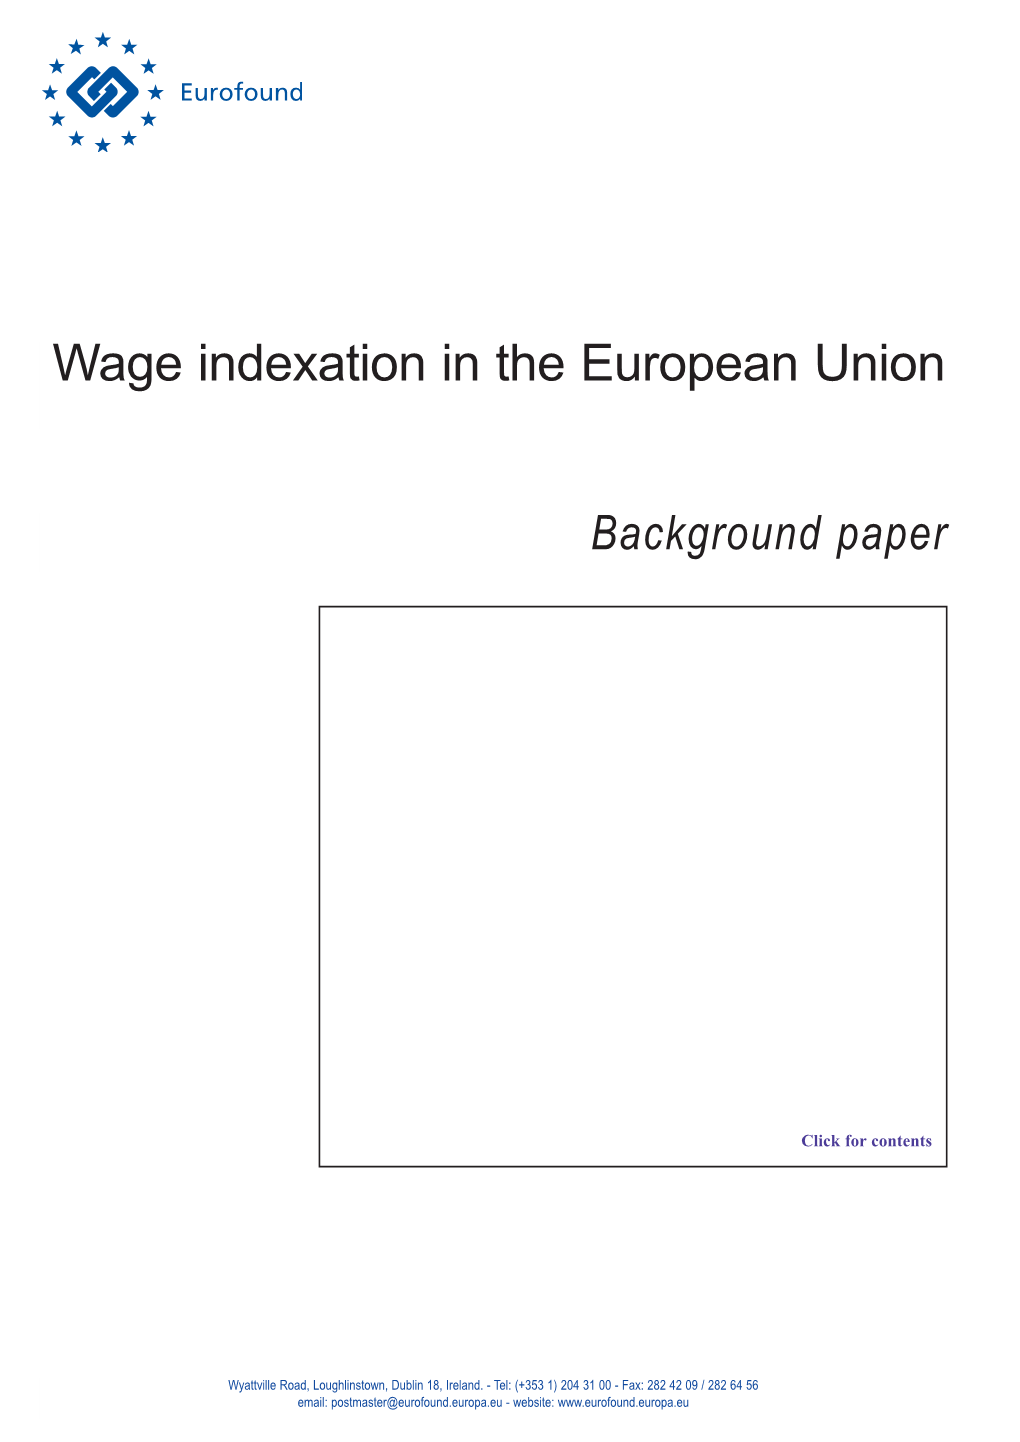 Wage Indexation in the European Union